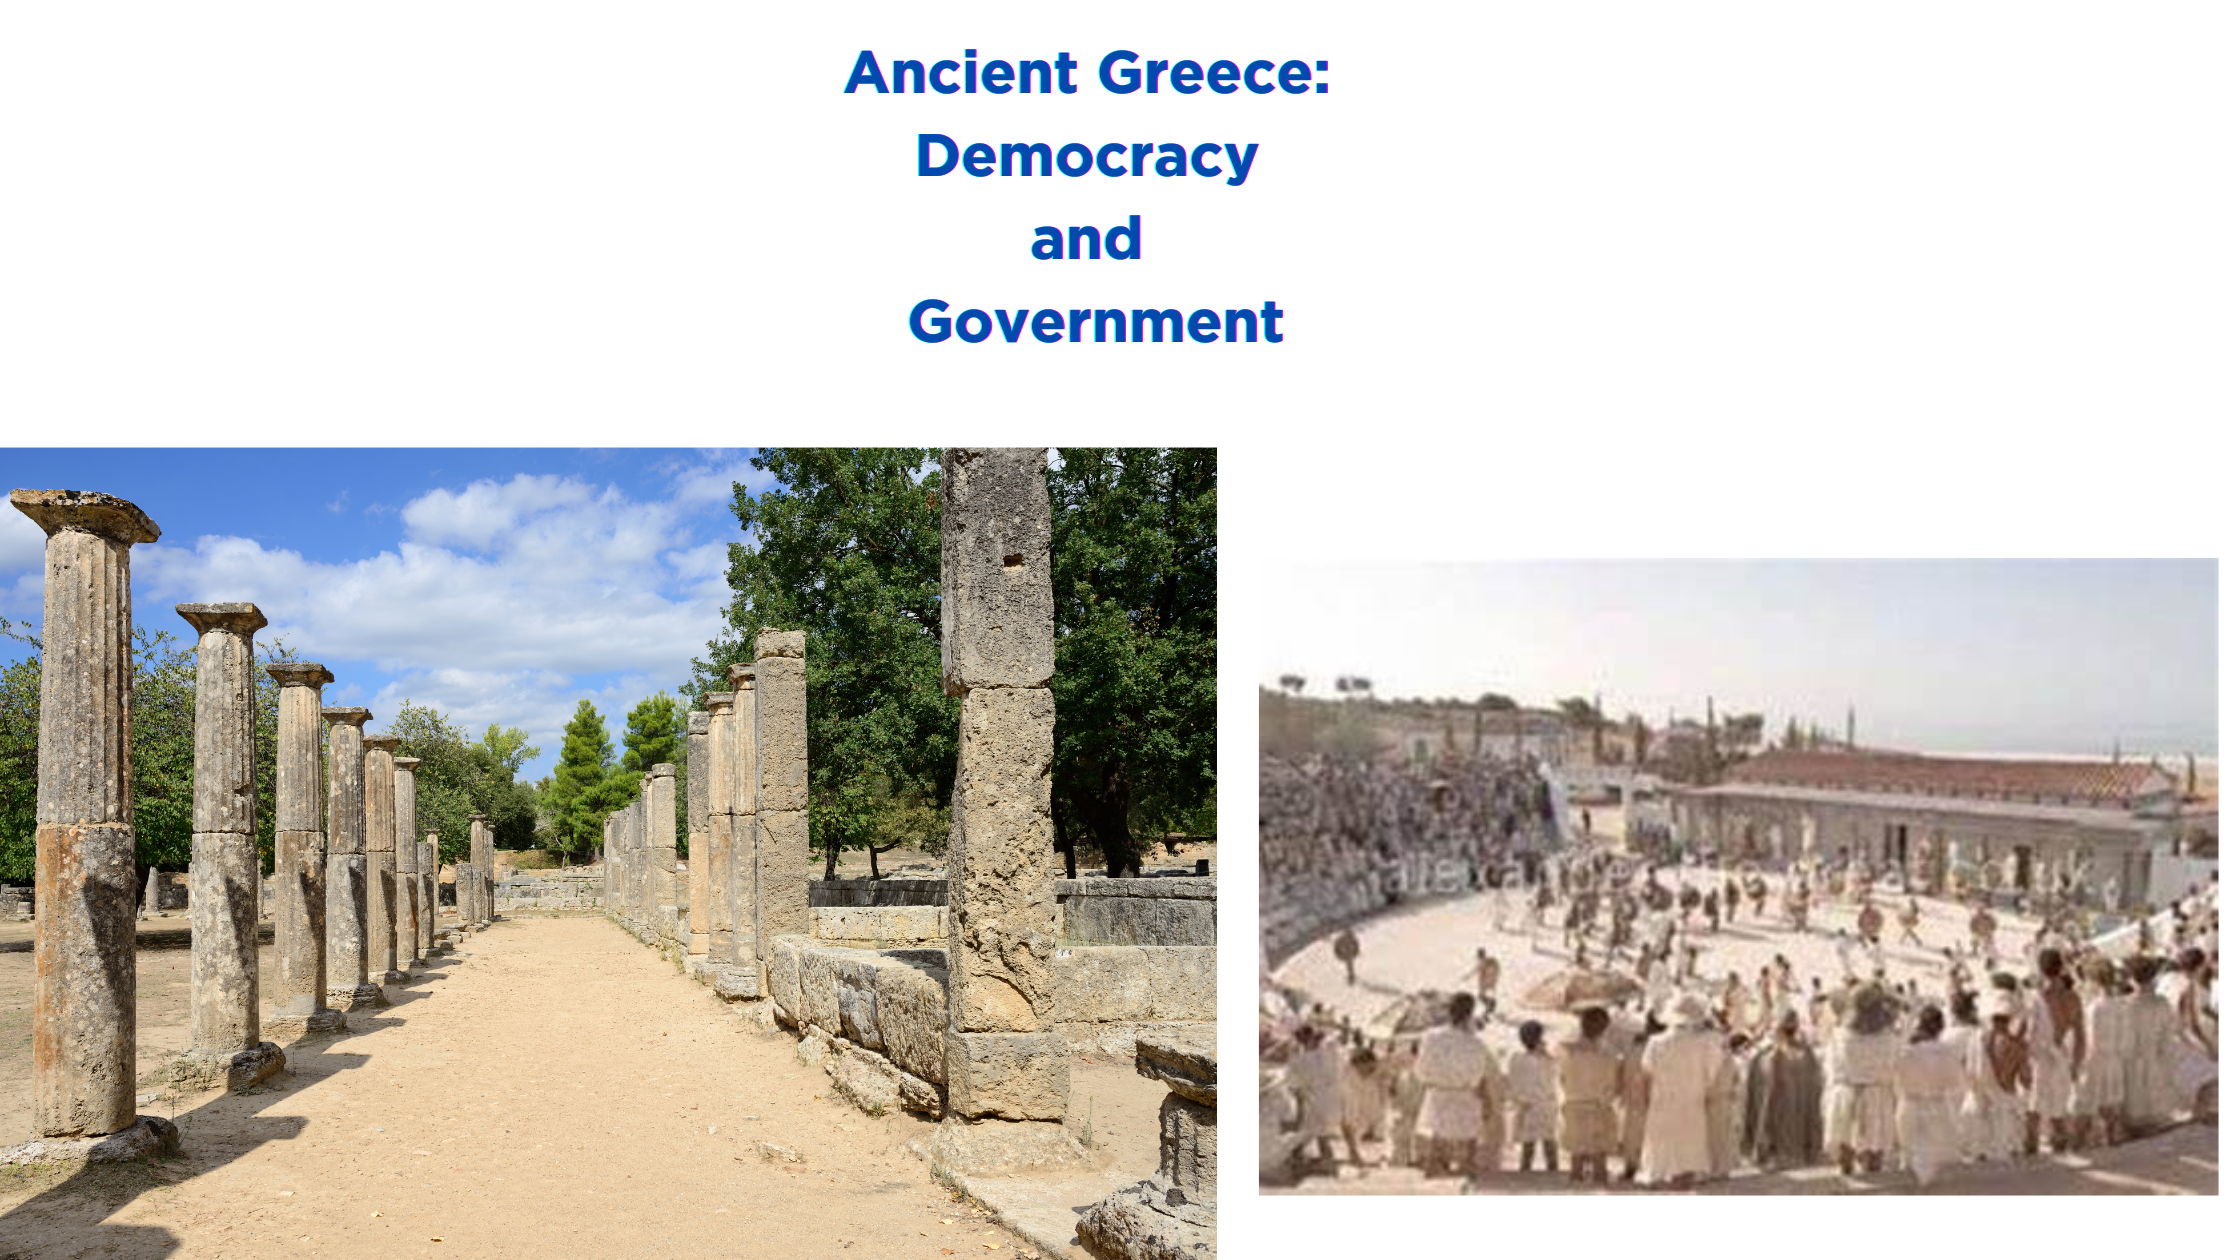 Ancient Greece: Democracy and Government